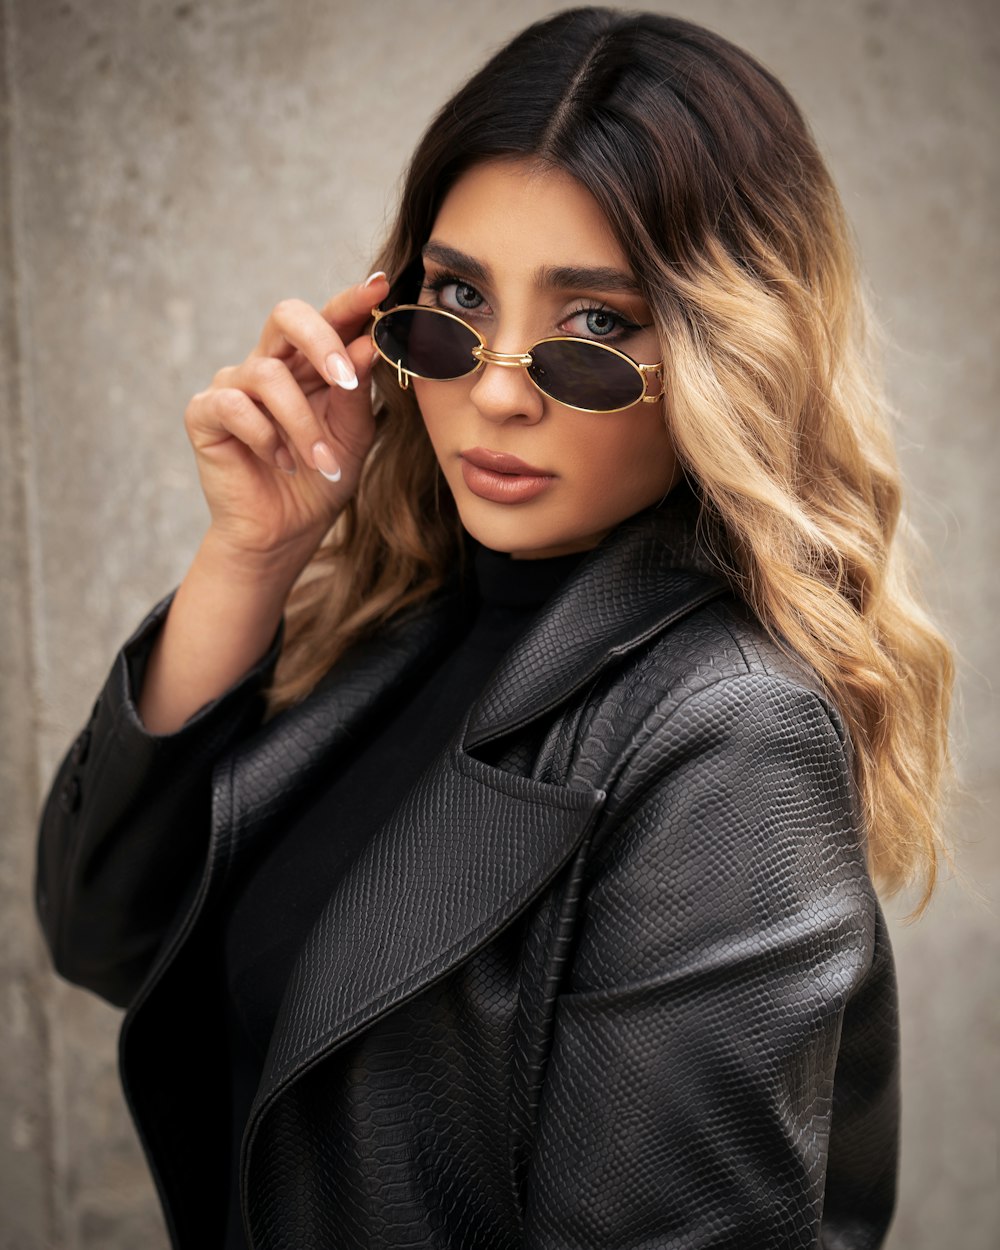 a woman wearing sunglasses and a black jacket